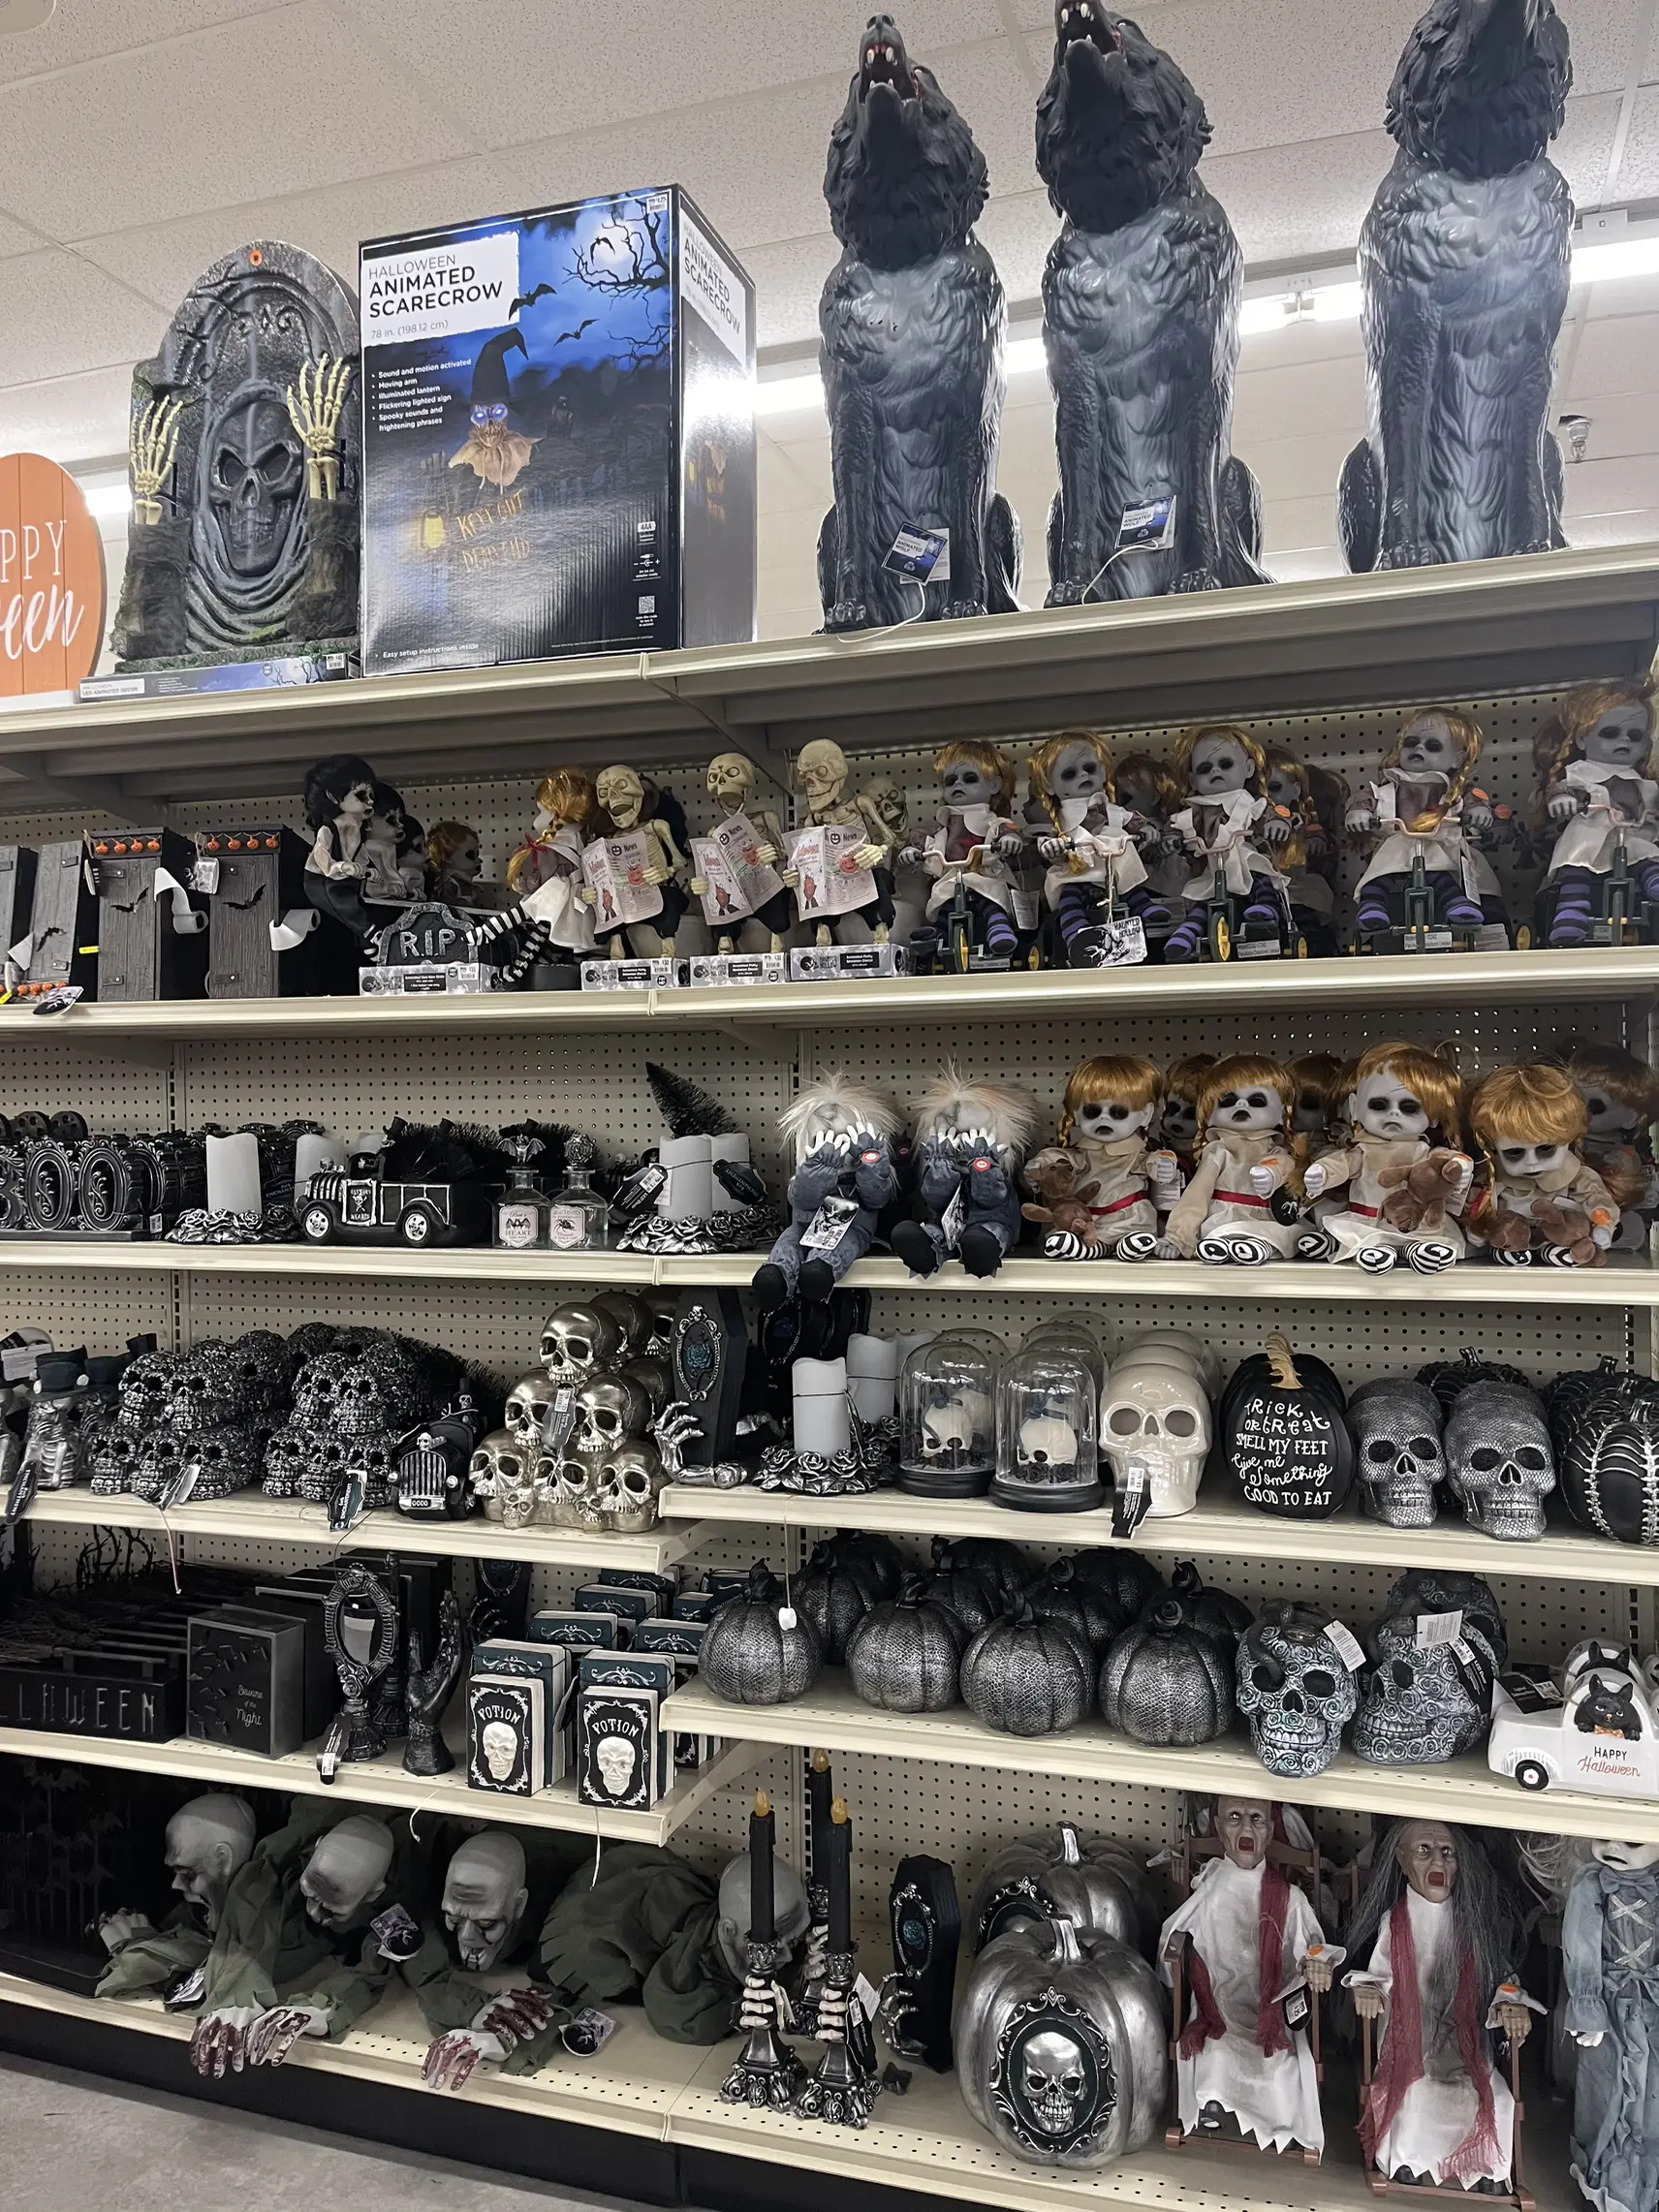 Why Halloween stuff is out at Michaels, Home Depot earlier each year